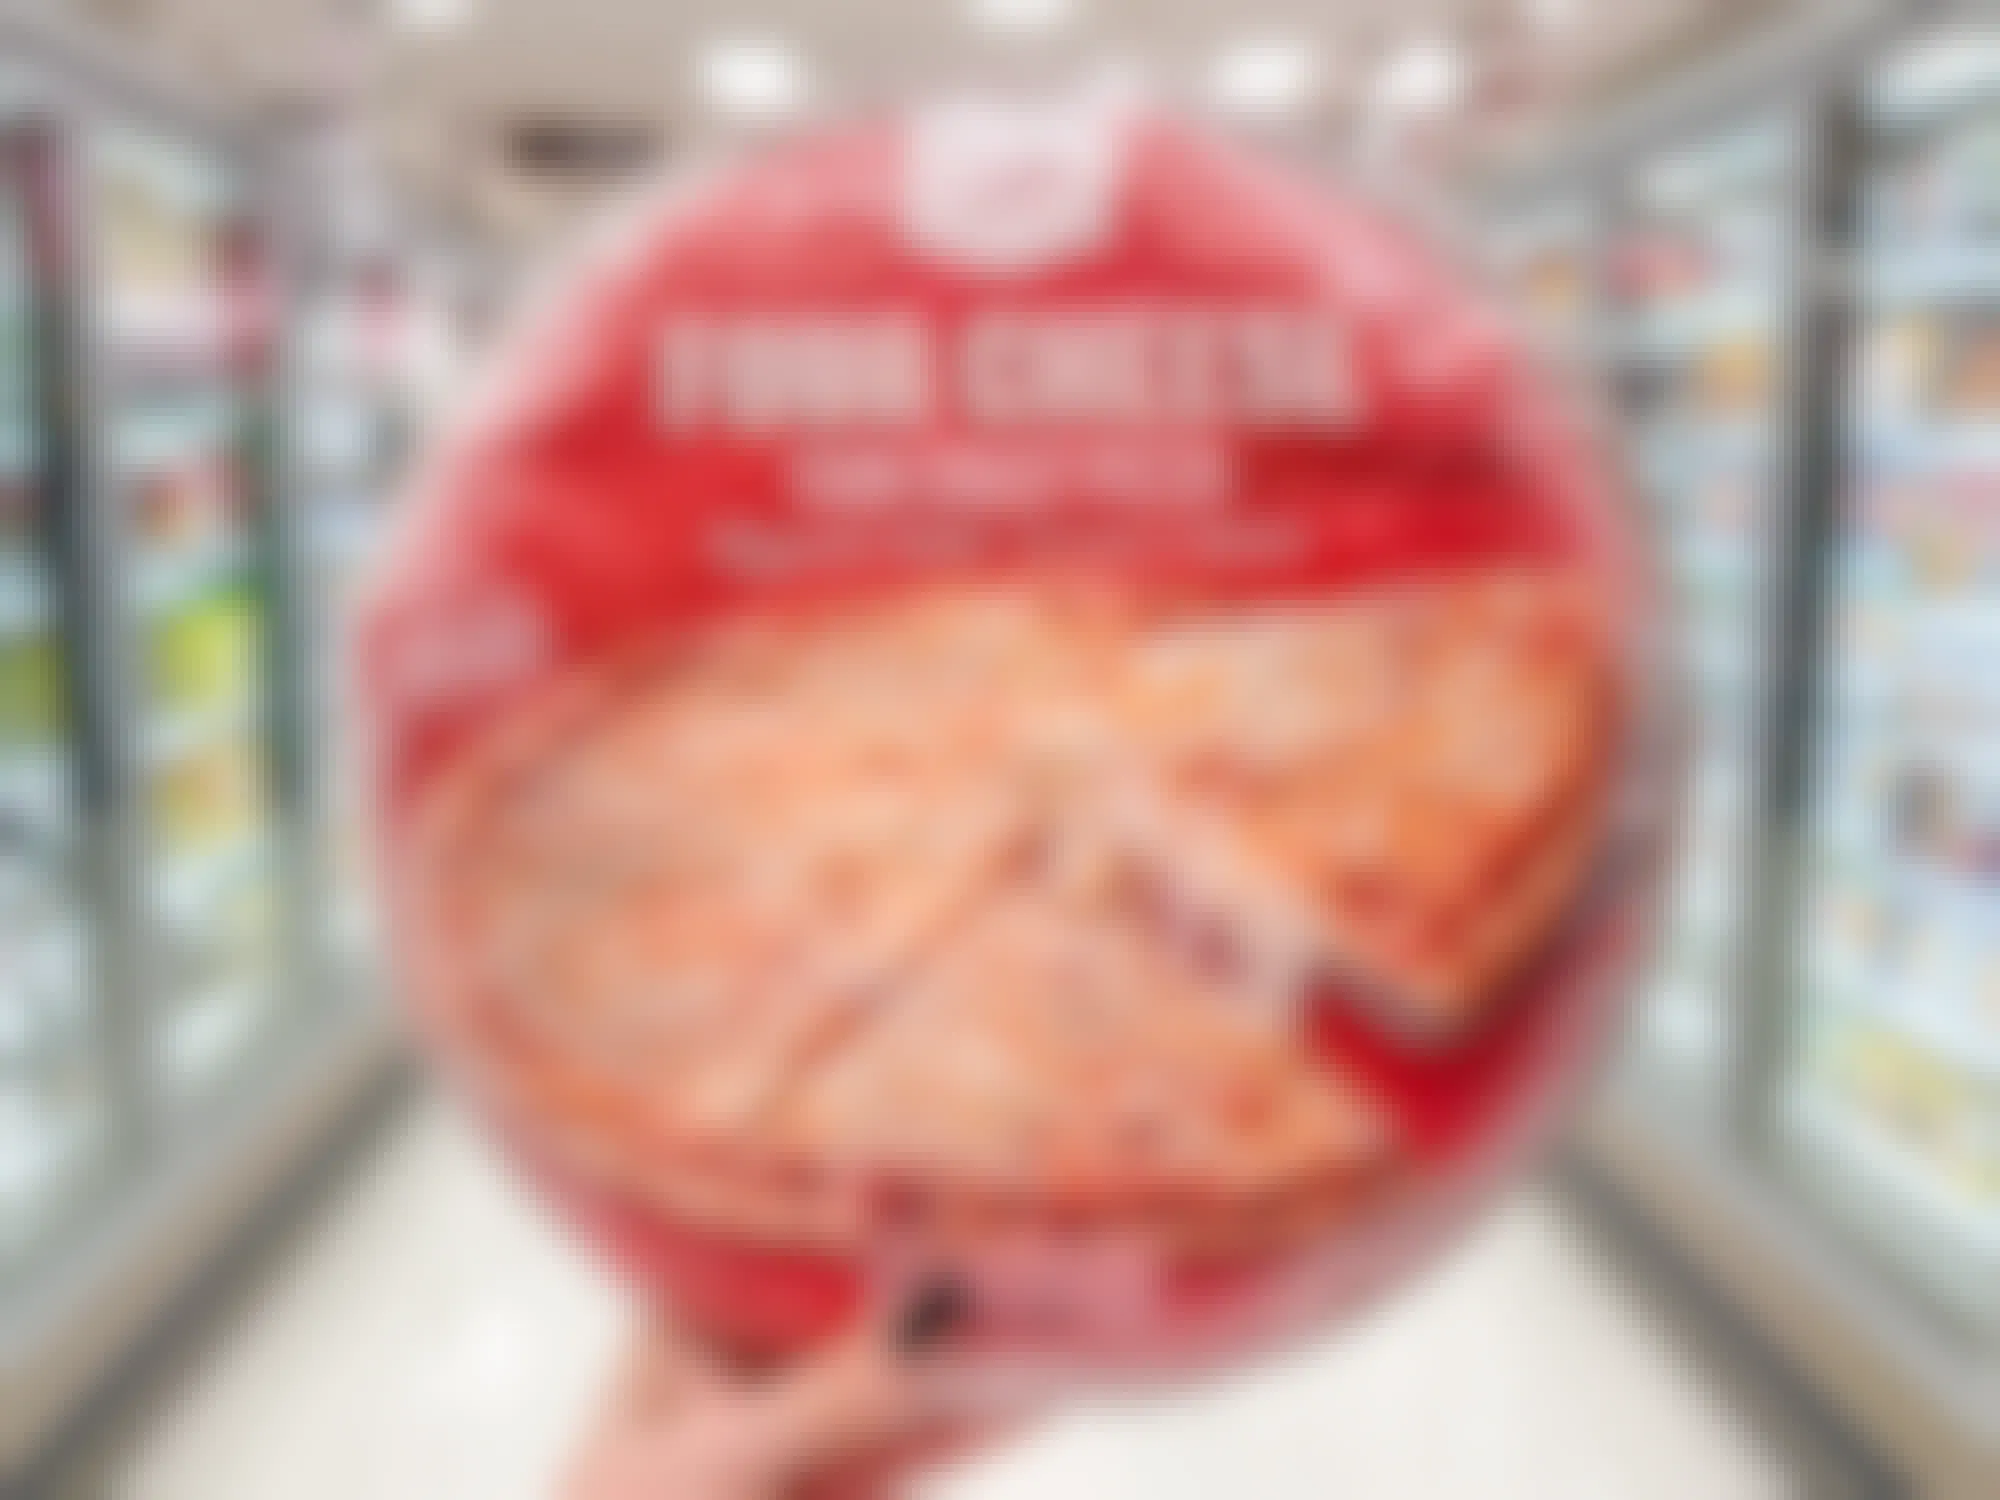 Someone holding up a Market Pantry frozen pizza in a Target aisle